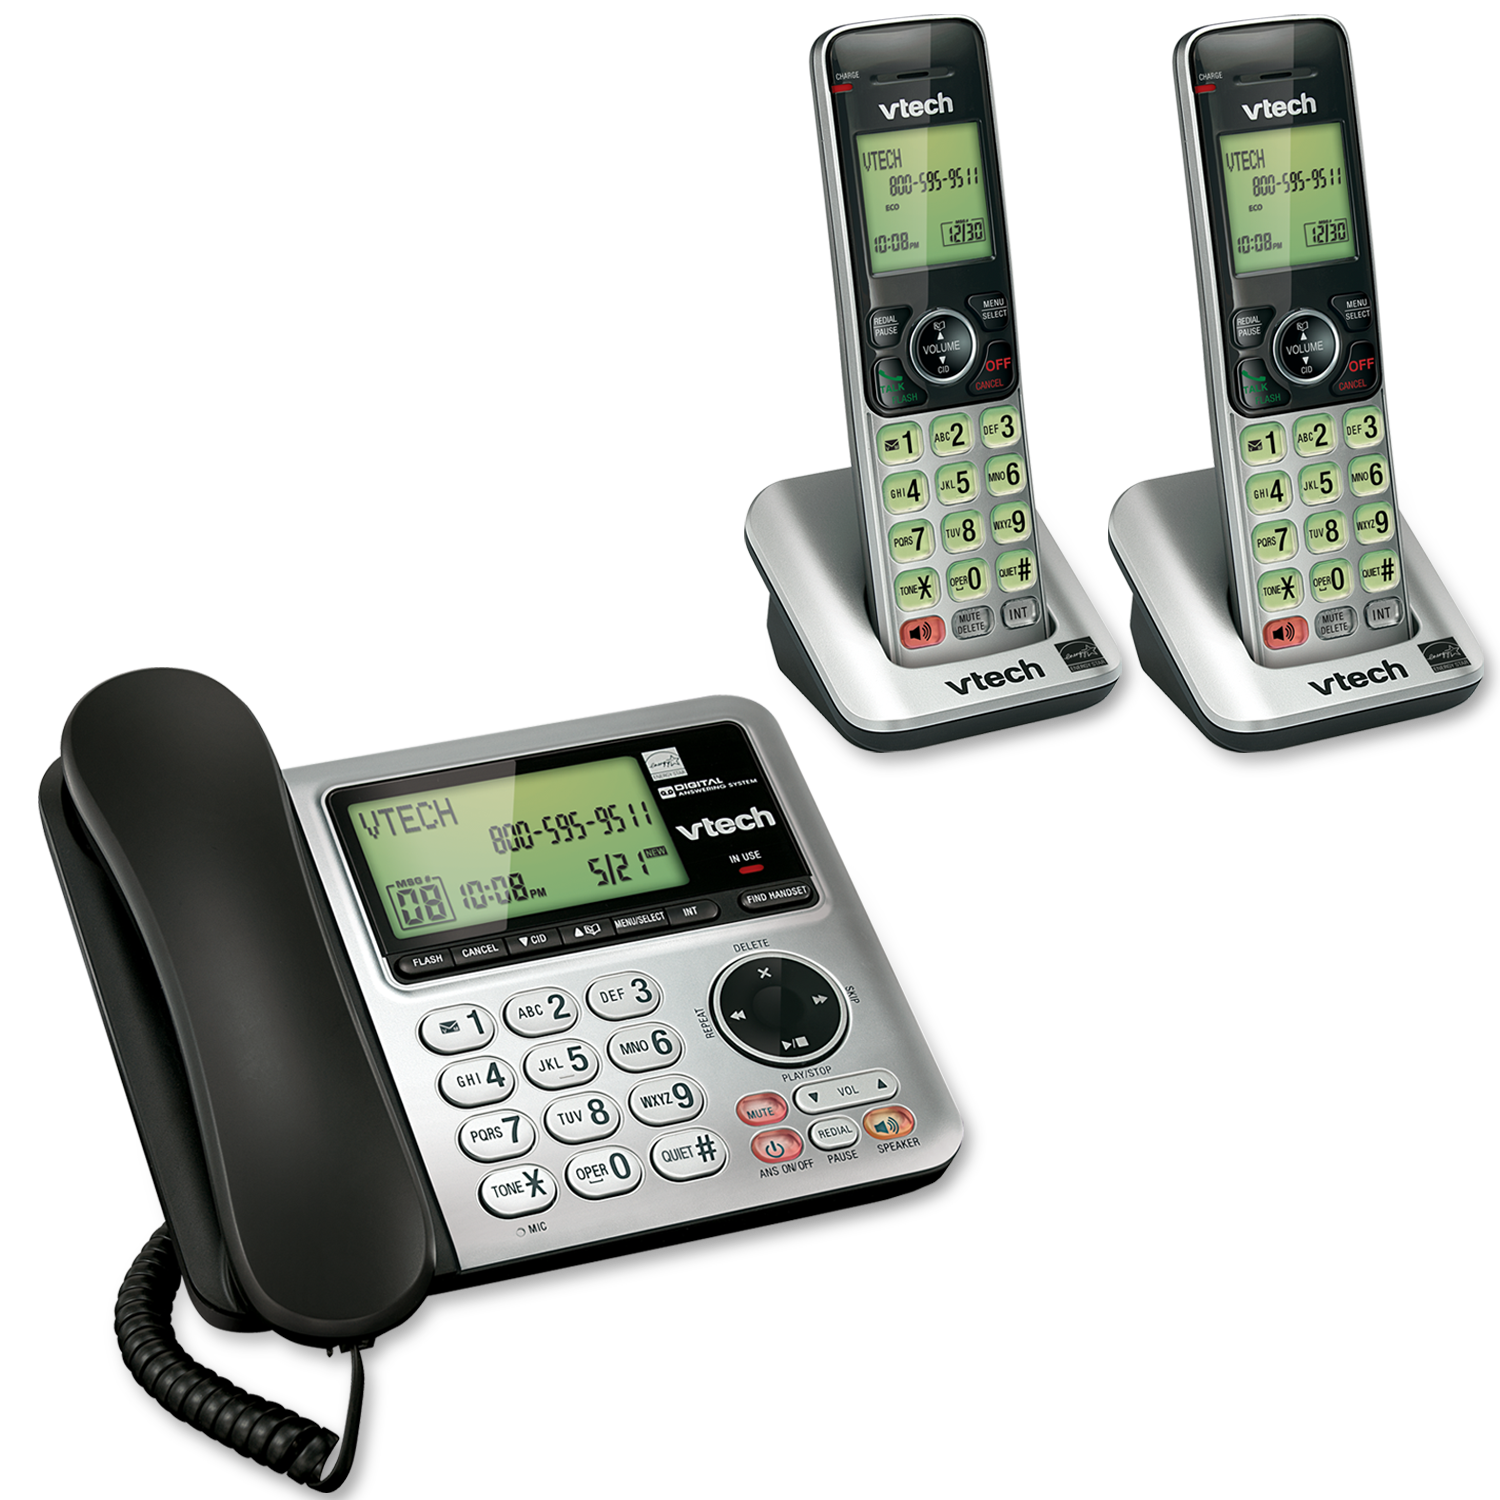 2 Handset Answering System with Caller ID/Call Waiting - view 2